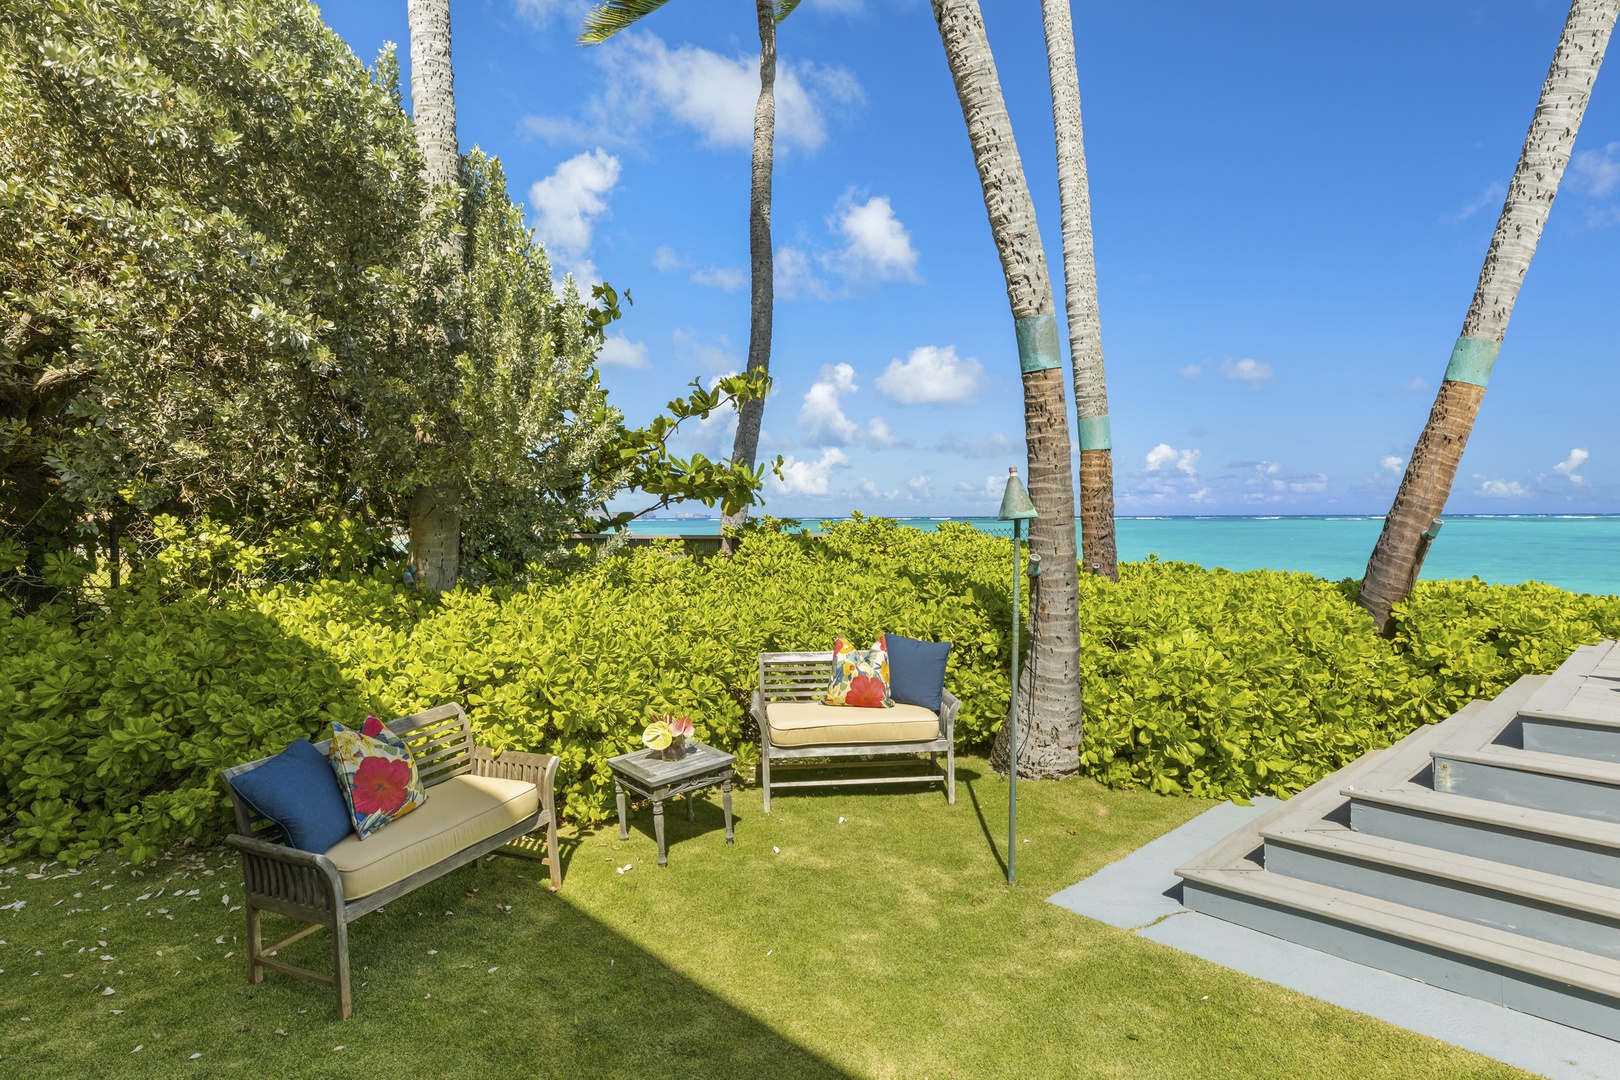 Kailua Vacation Rentals, Mokulua Sunrise - The home’s backyard features an elevated oceanside lanai where chaise lounge chairs, a hammock, and swaying palms beckon you to soak up some tropical sun.